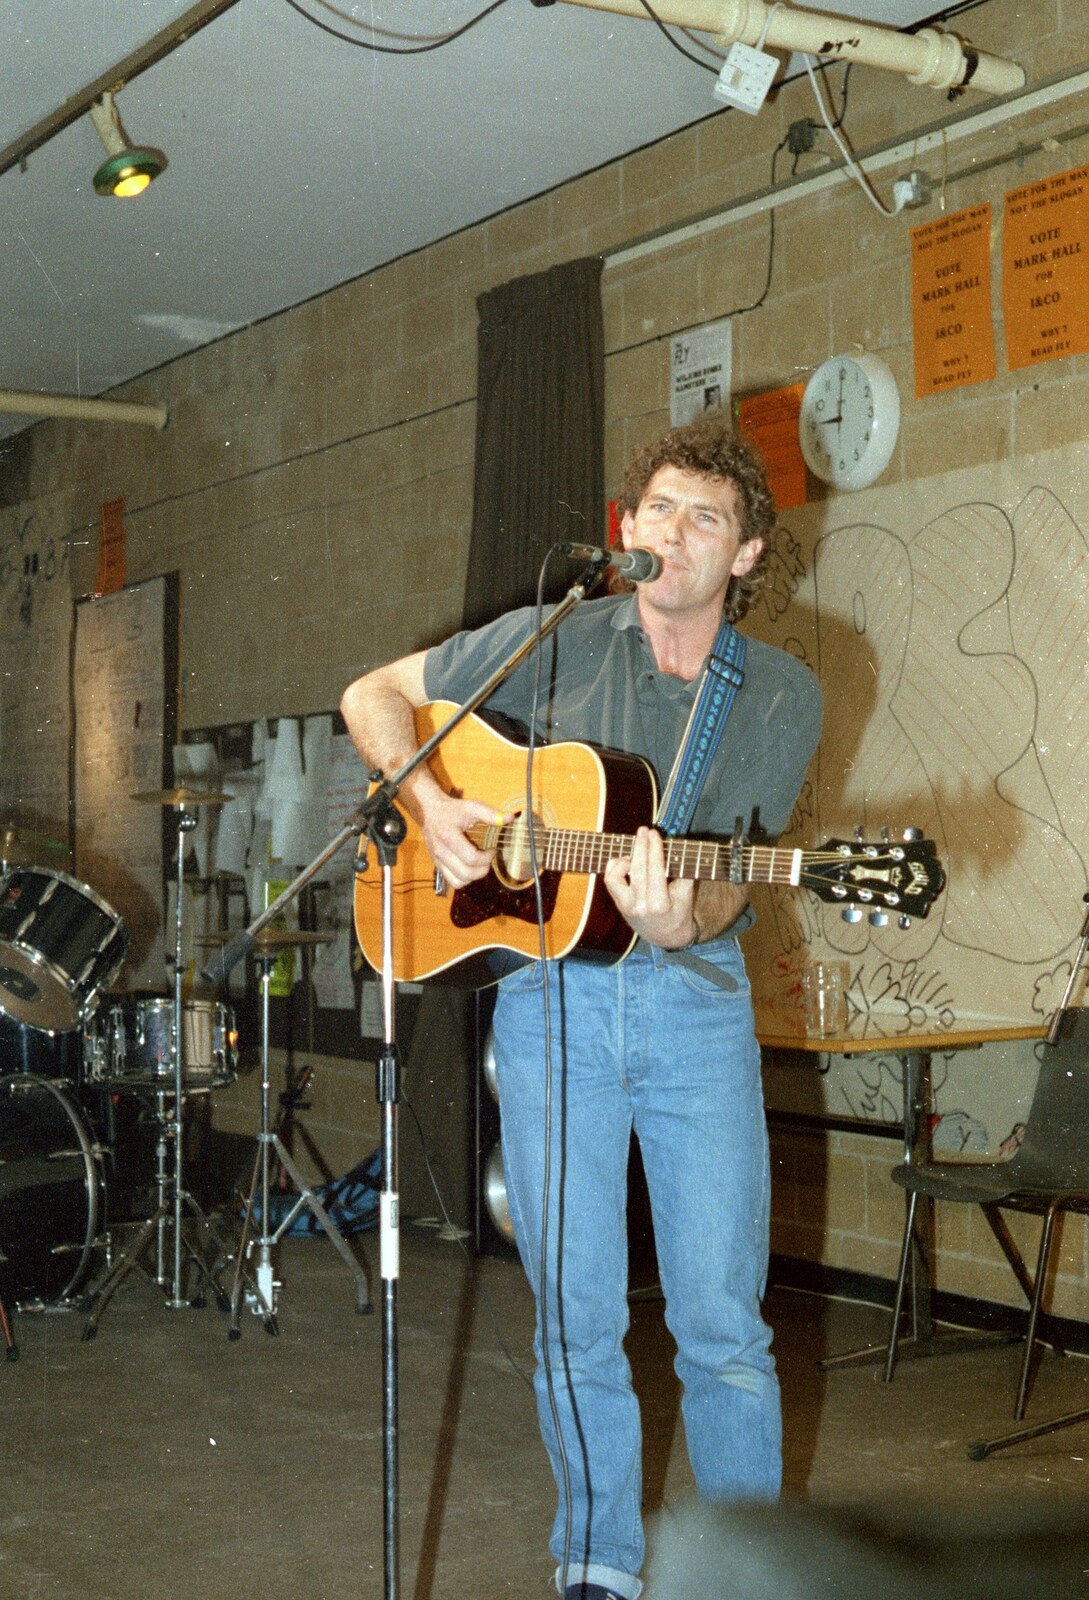 Some acoustic guitar from Uni: The Pirate RAG Review, PPSU Students' Union, Plymouth - 11th February 1987